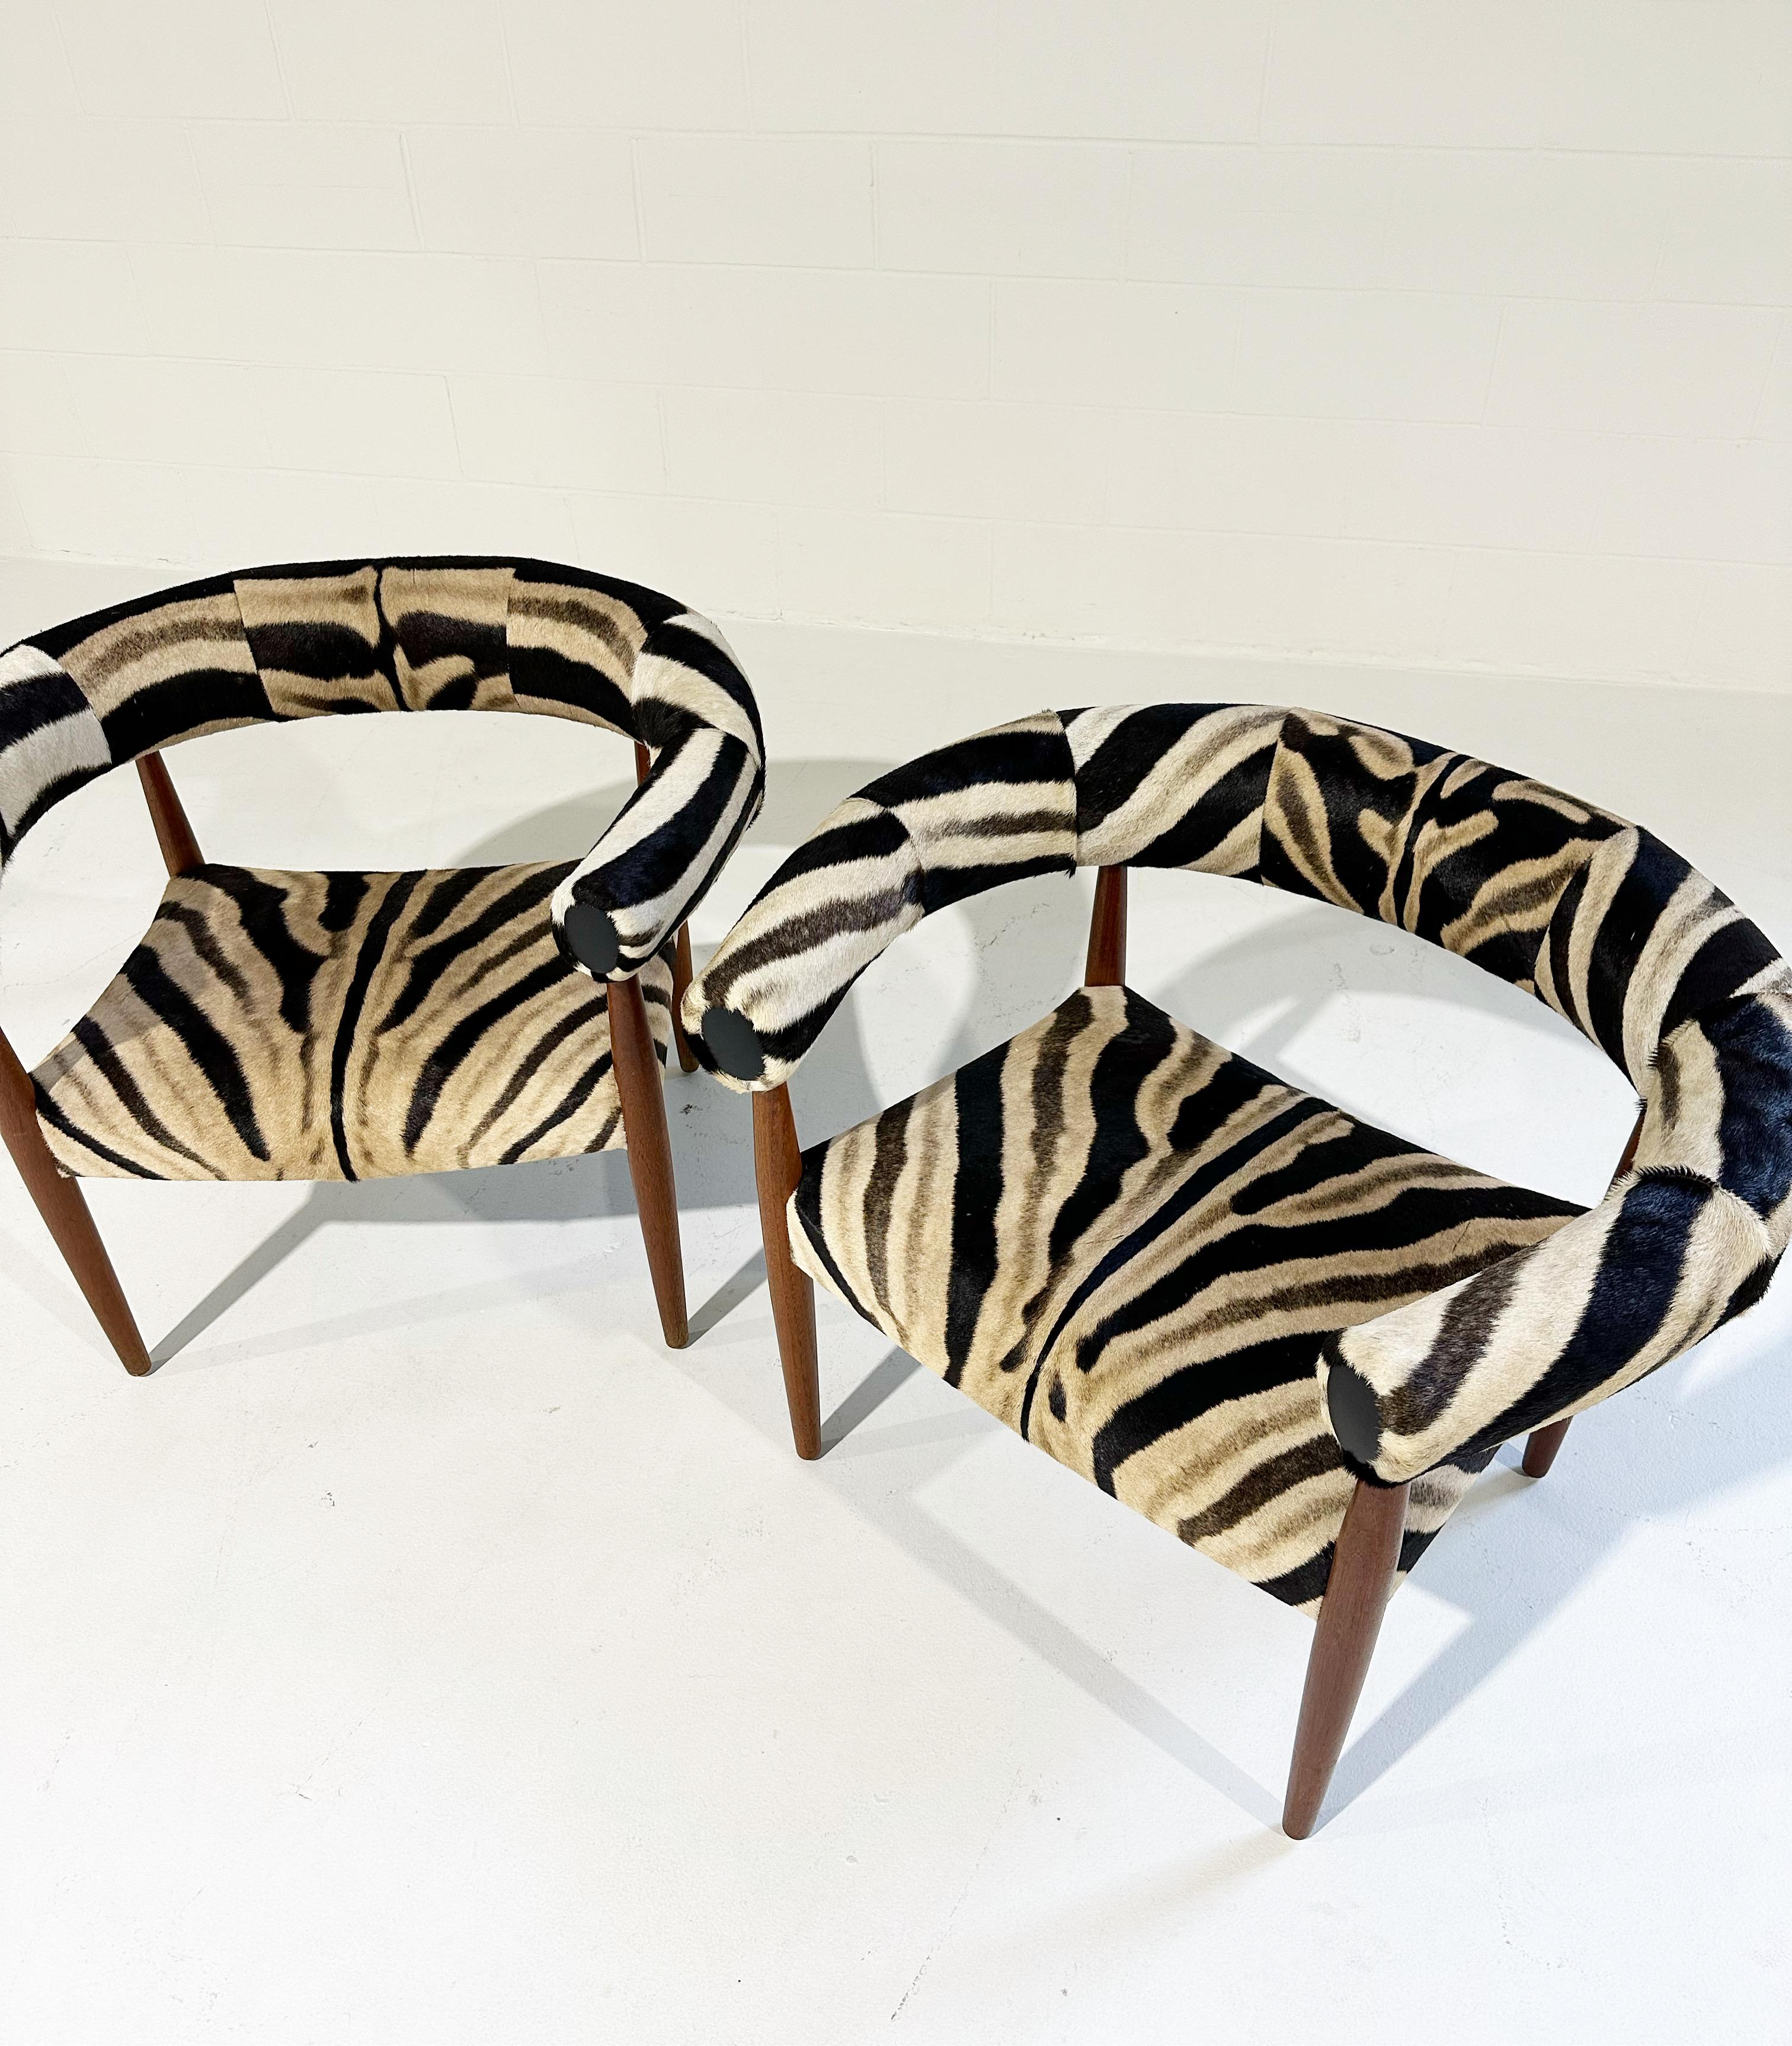 Vintage Nanna and Jorgen Ditzel Ring Lounge Chairs in Zebra Hide 2